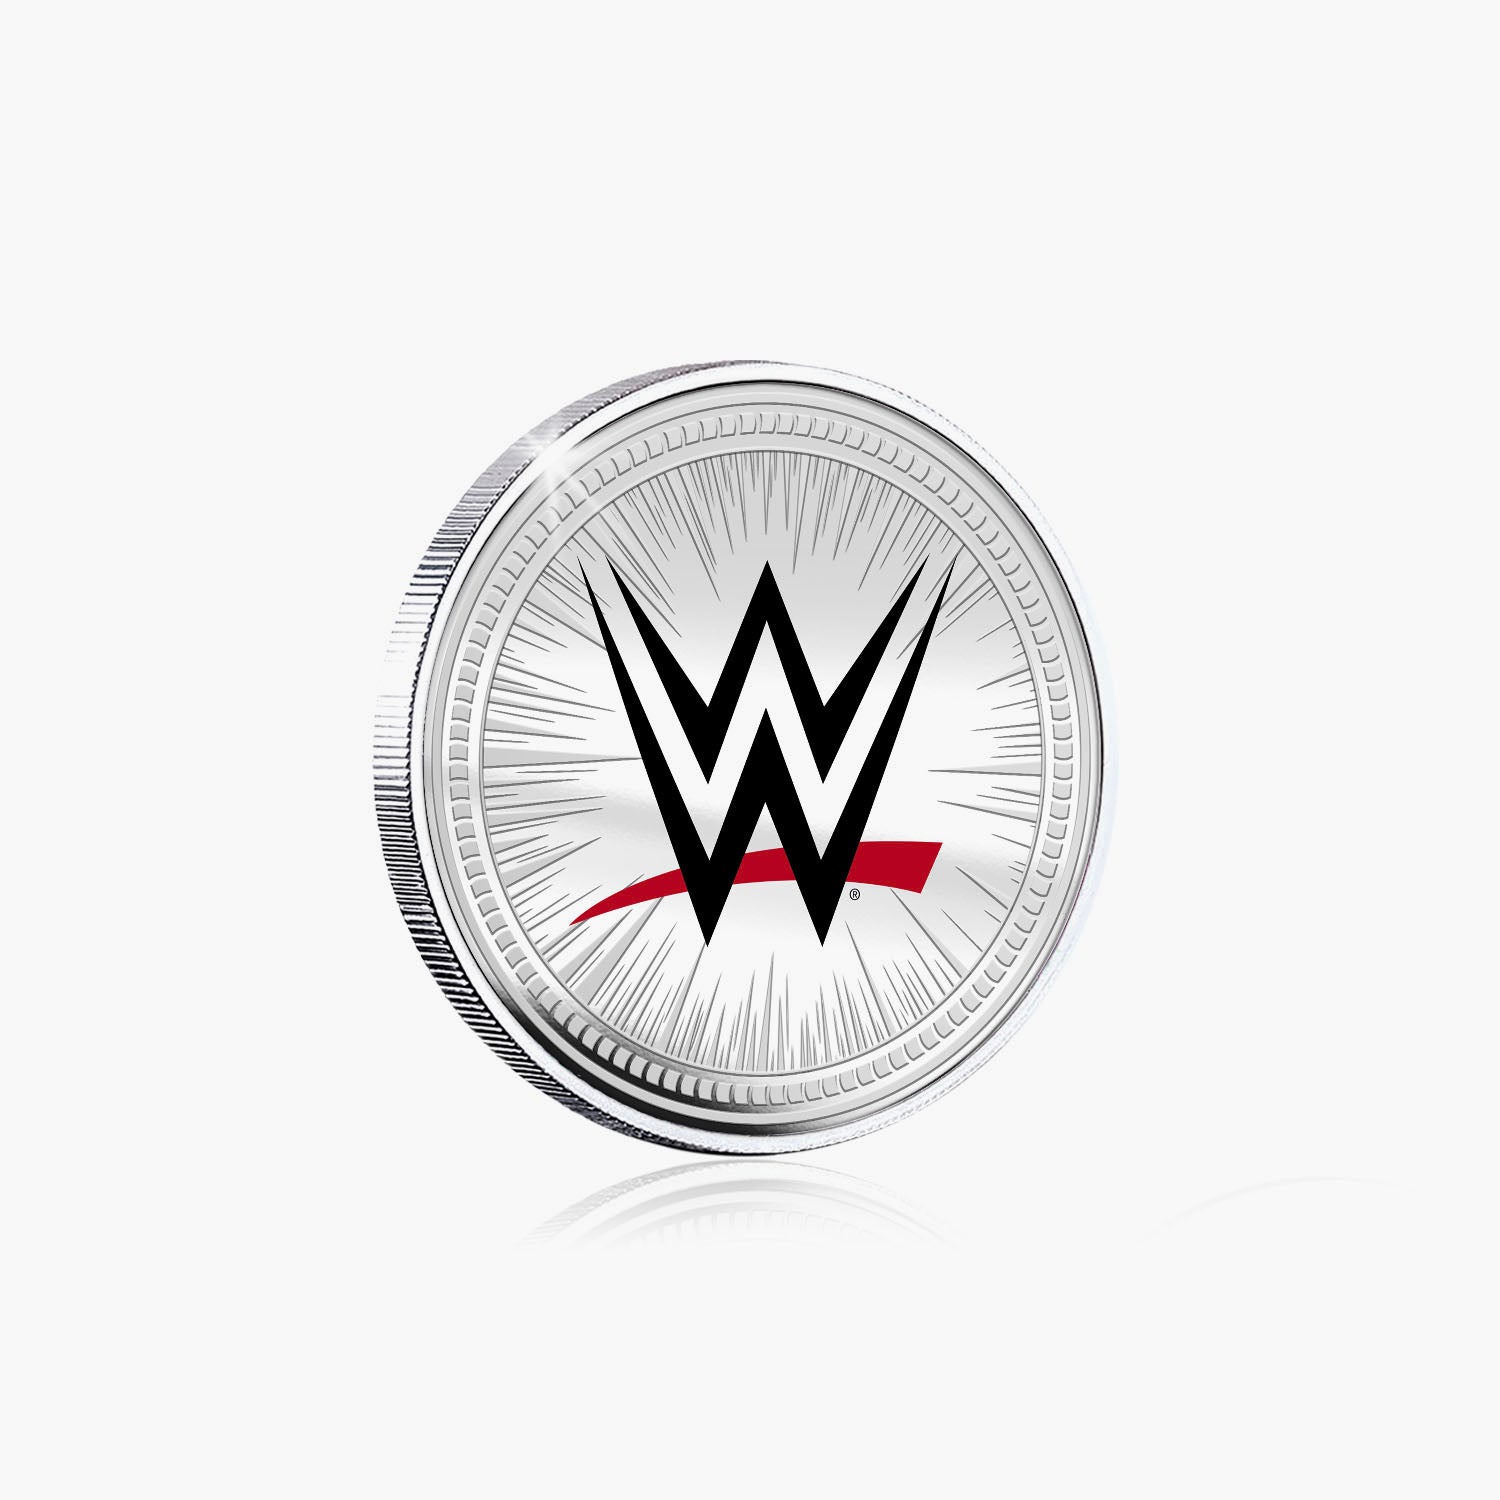 WWE Commemorative Collection - Rey Mysterio - 32mm Silver Plated Commemorative